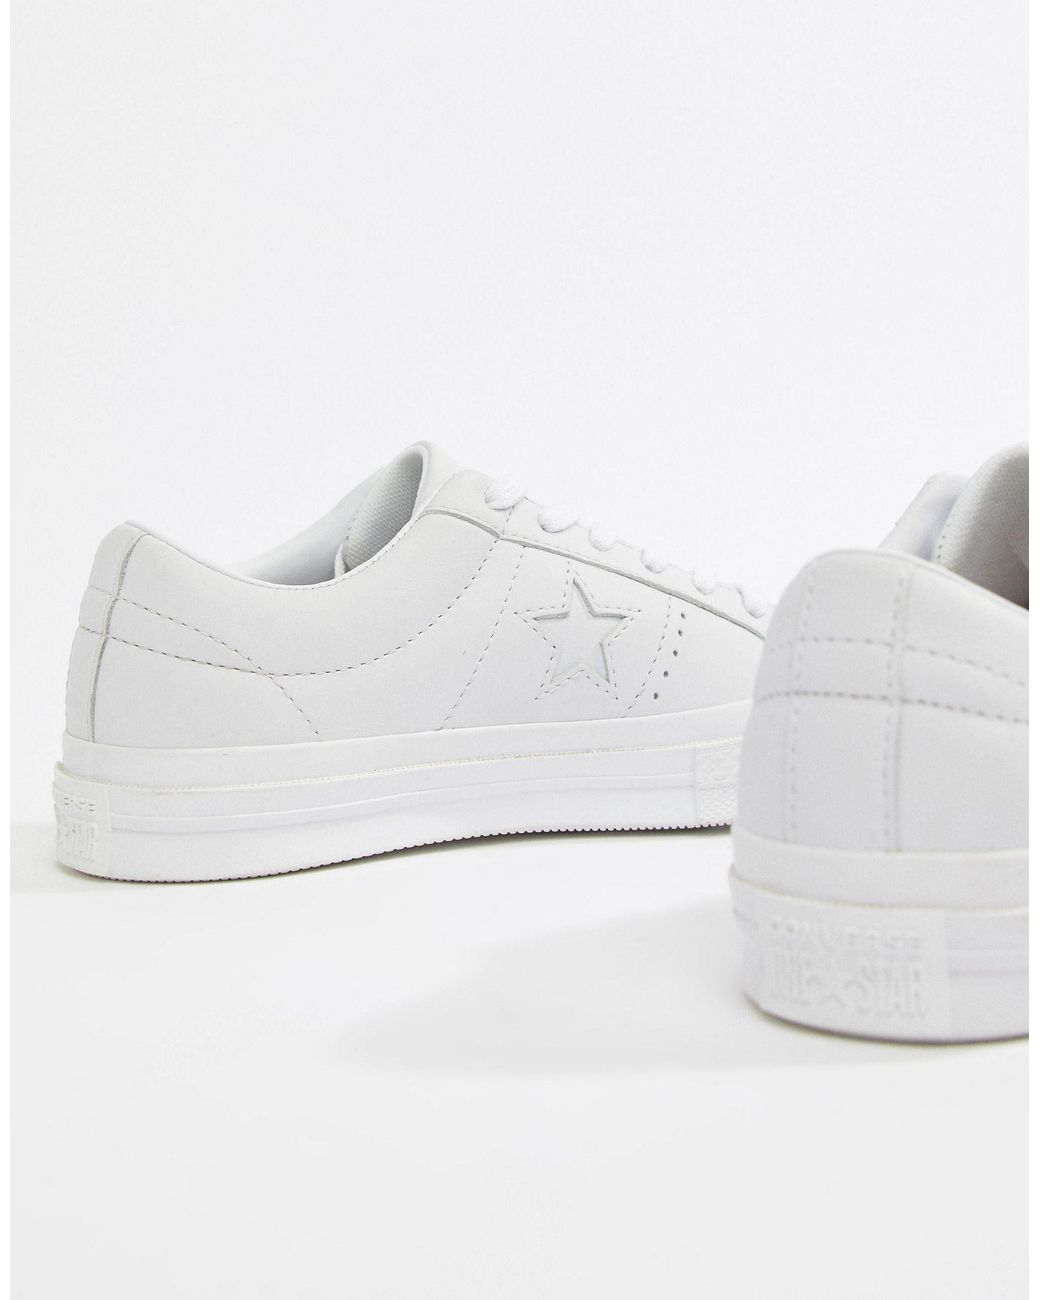 Converse One Star Triple Leather Sneakers in White | Lyst